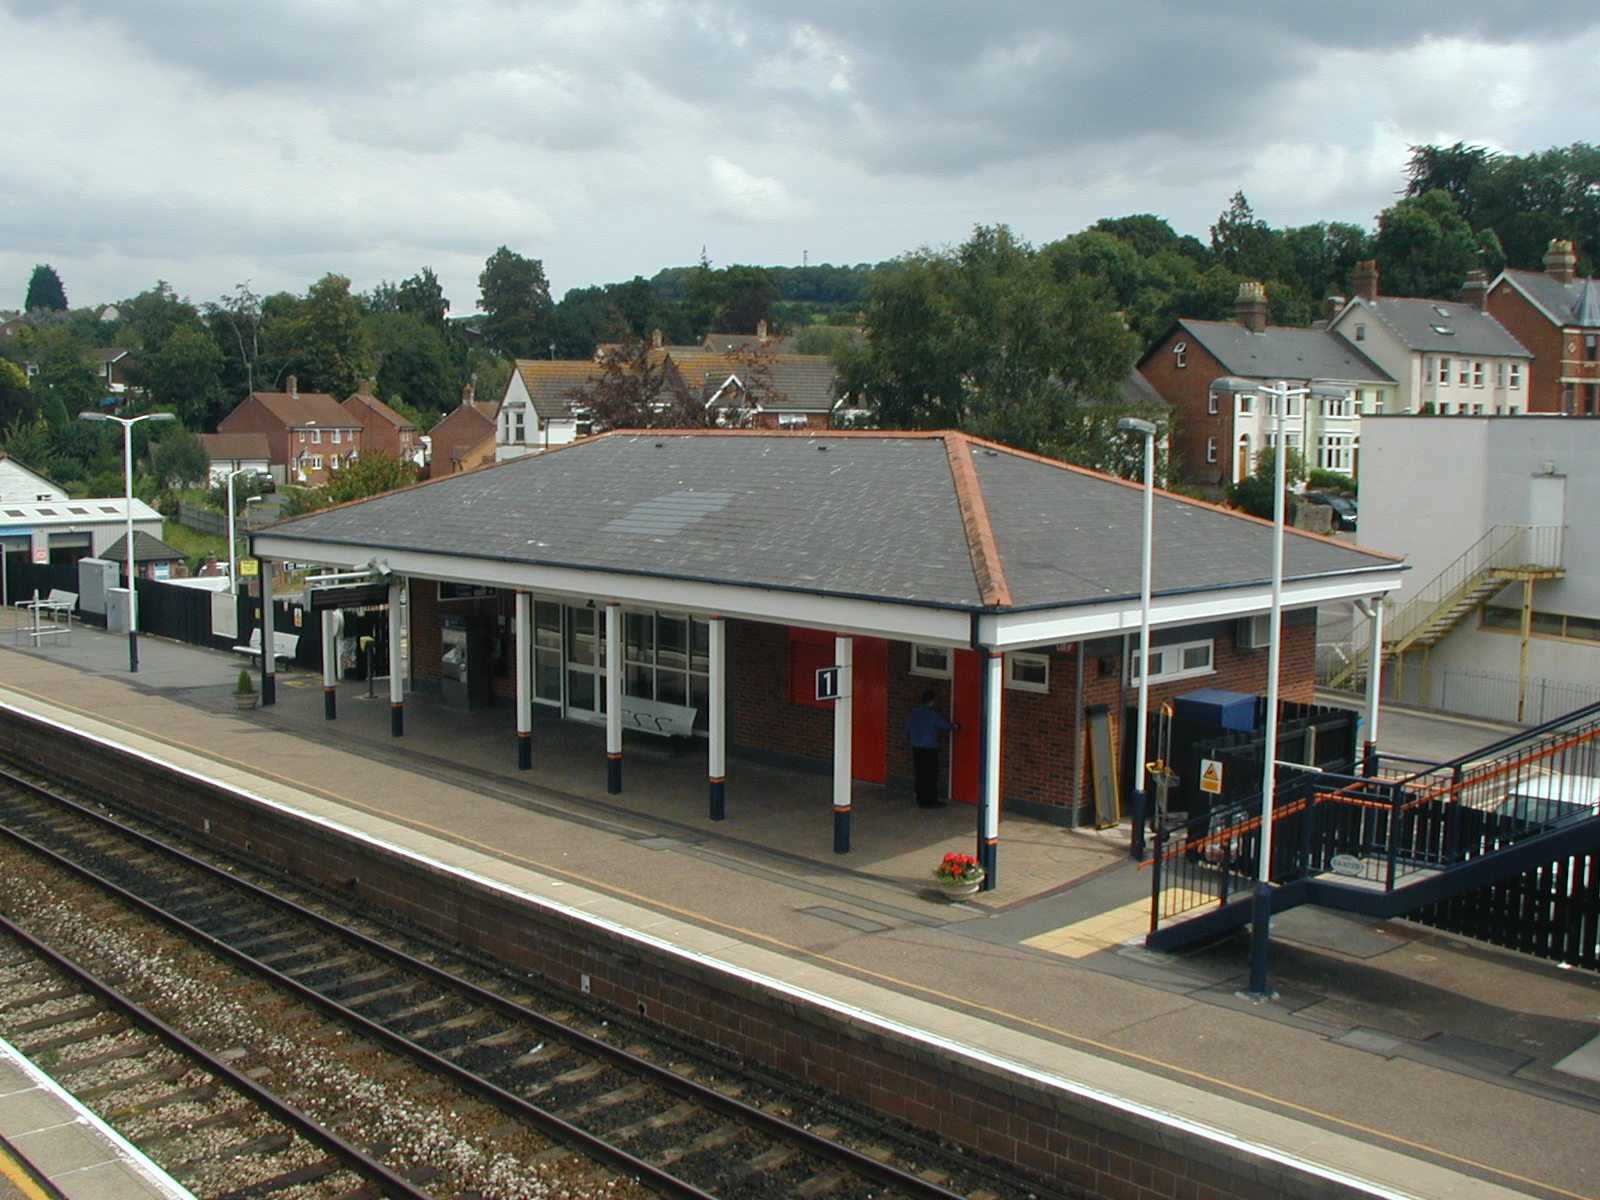 Honiton station building seen from footbridge in 2011